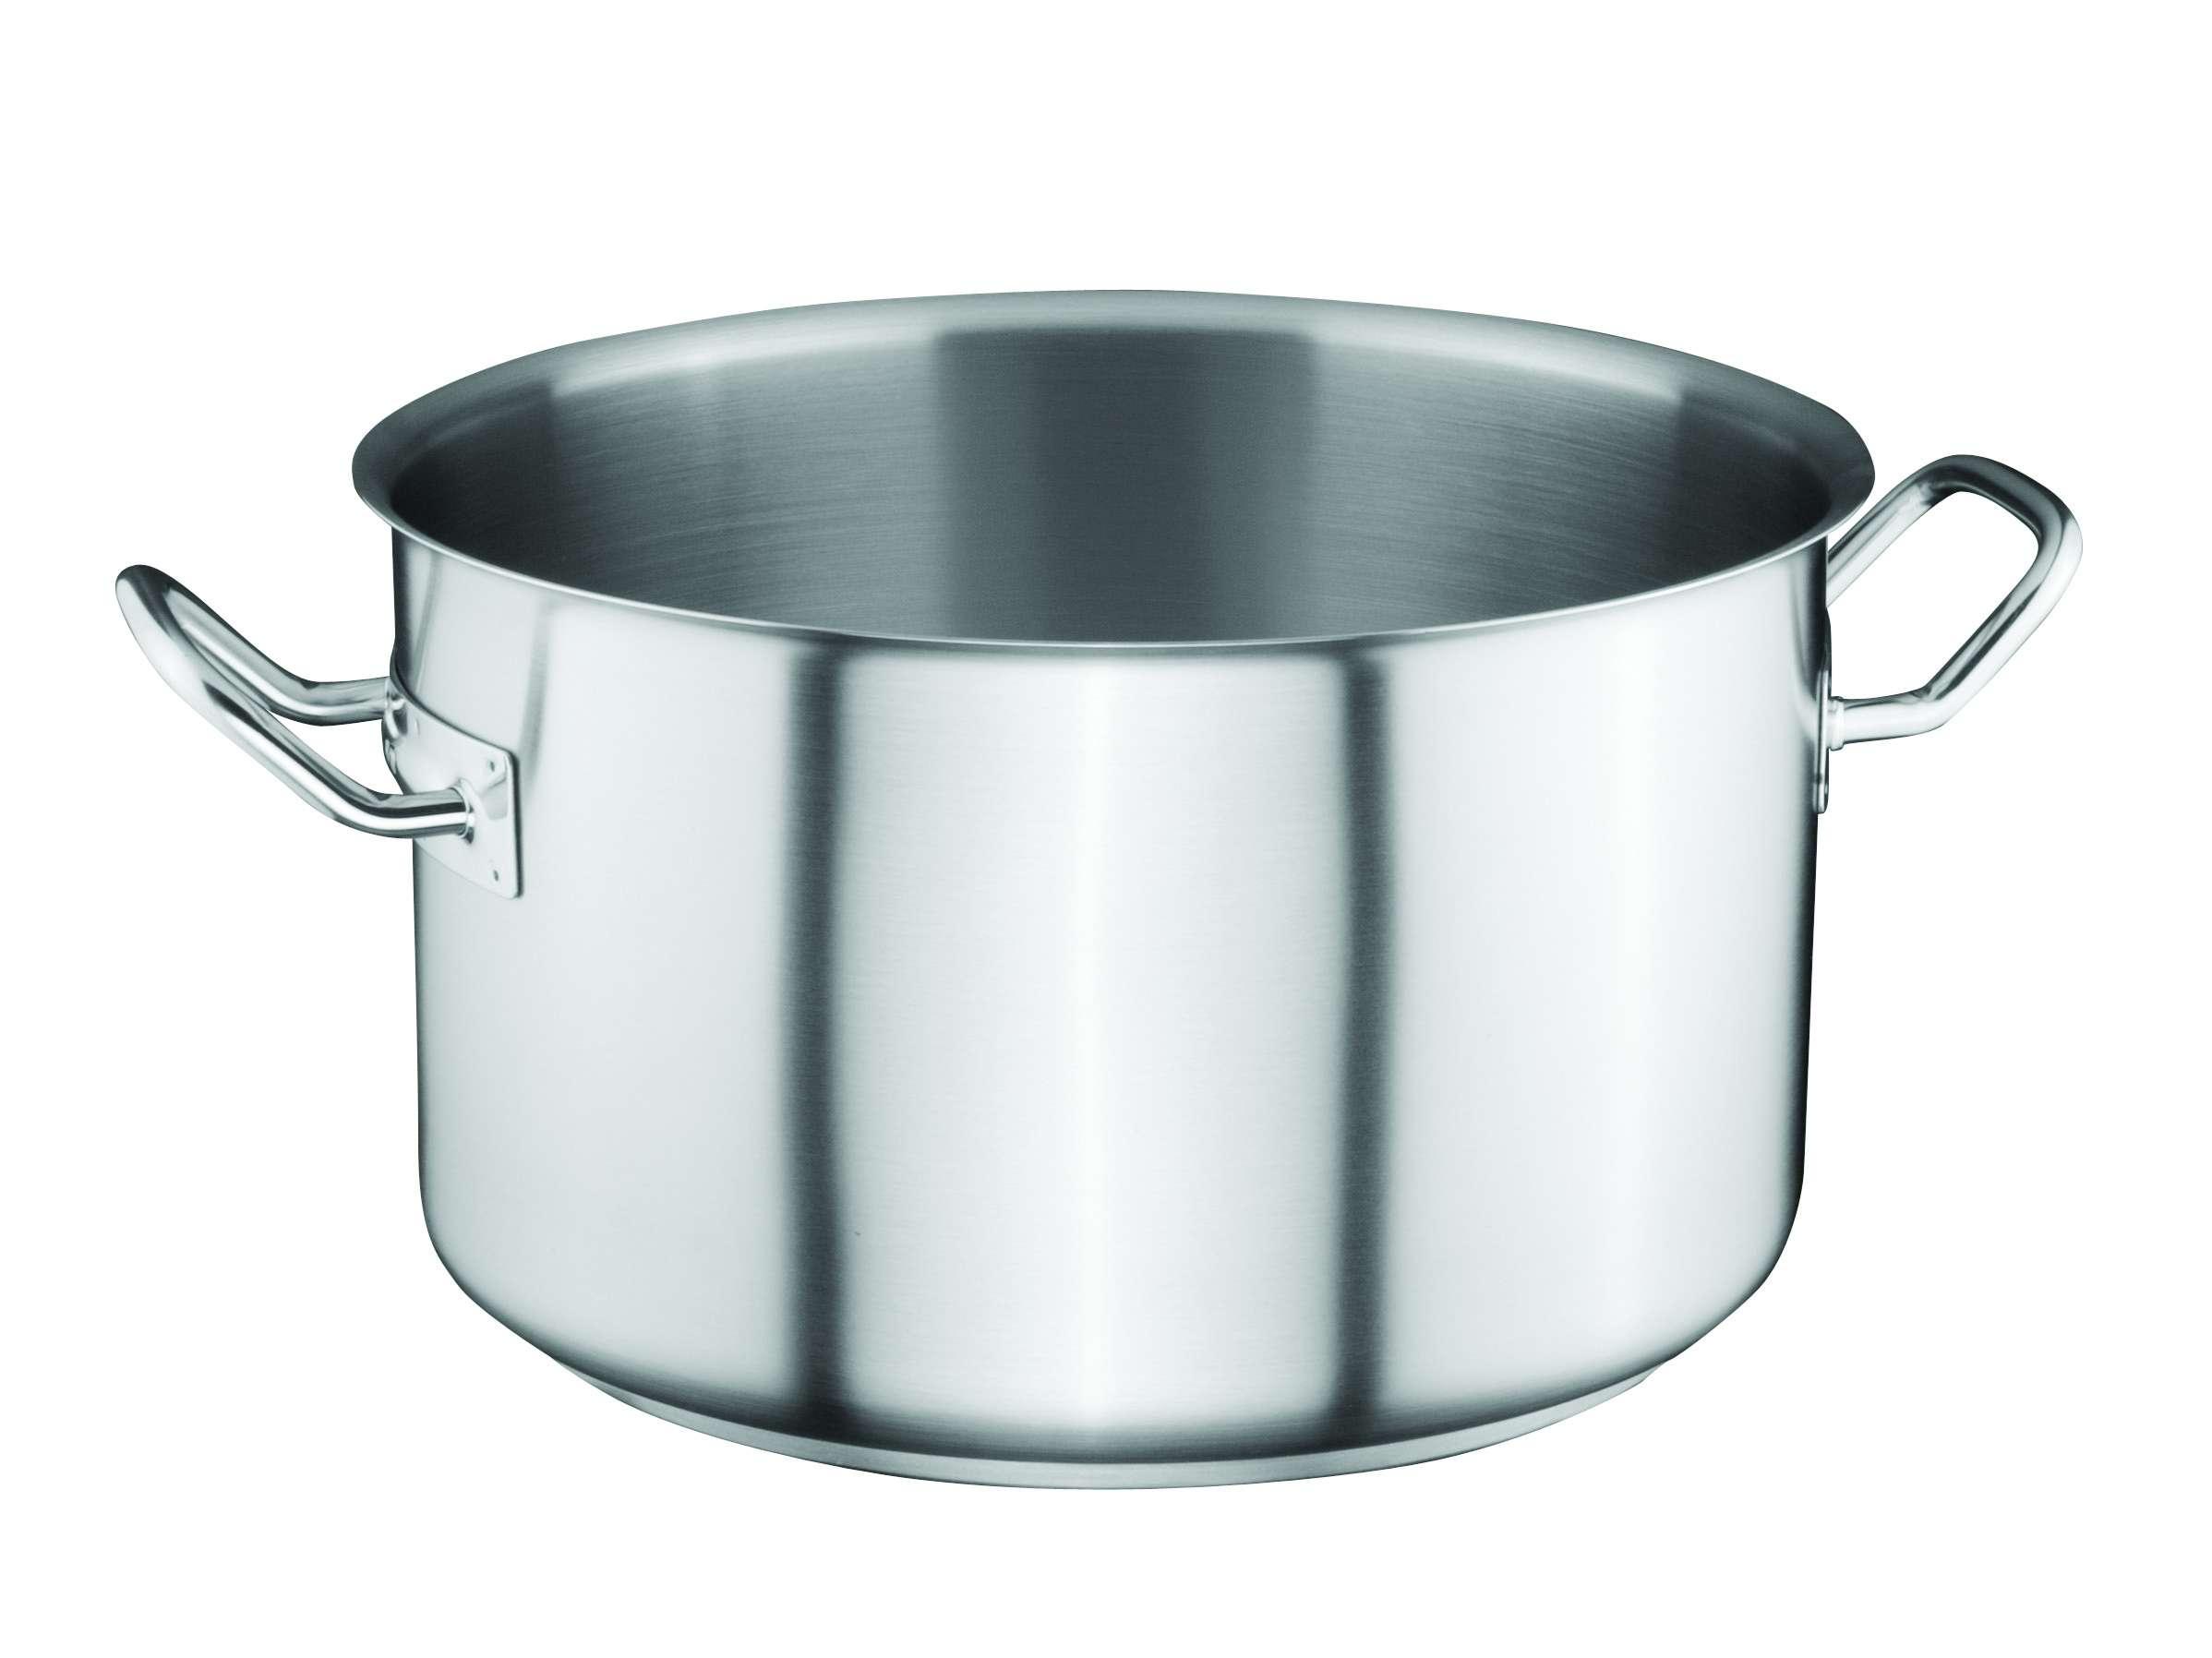 Ozti Stainless Steel Sauce Pot 28 cm x 17 cm Silver Stainless Steel